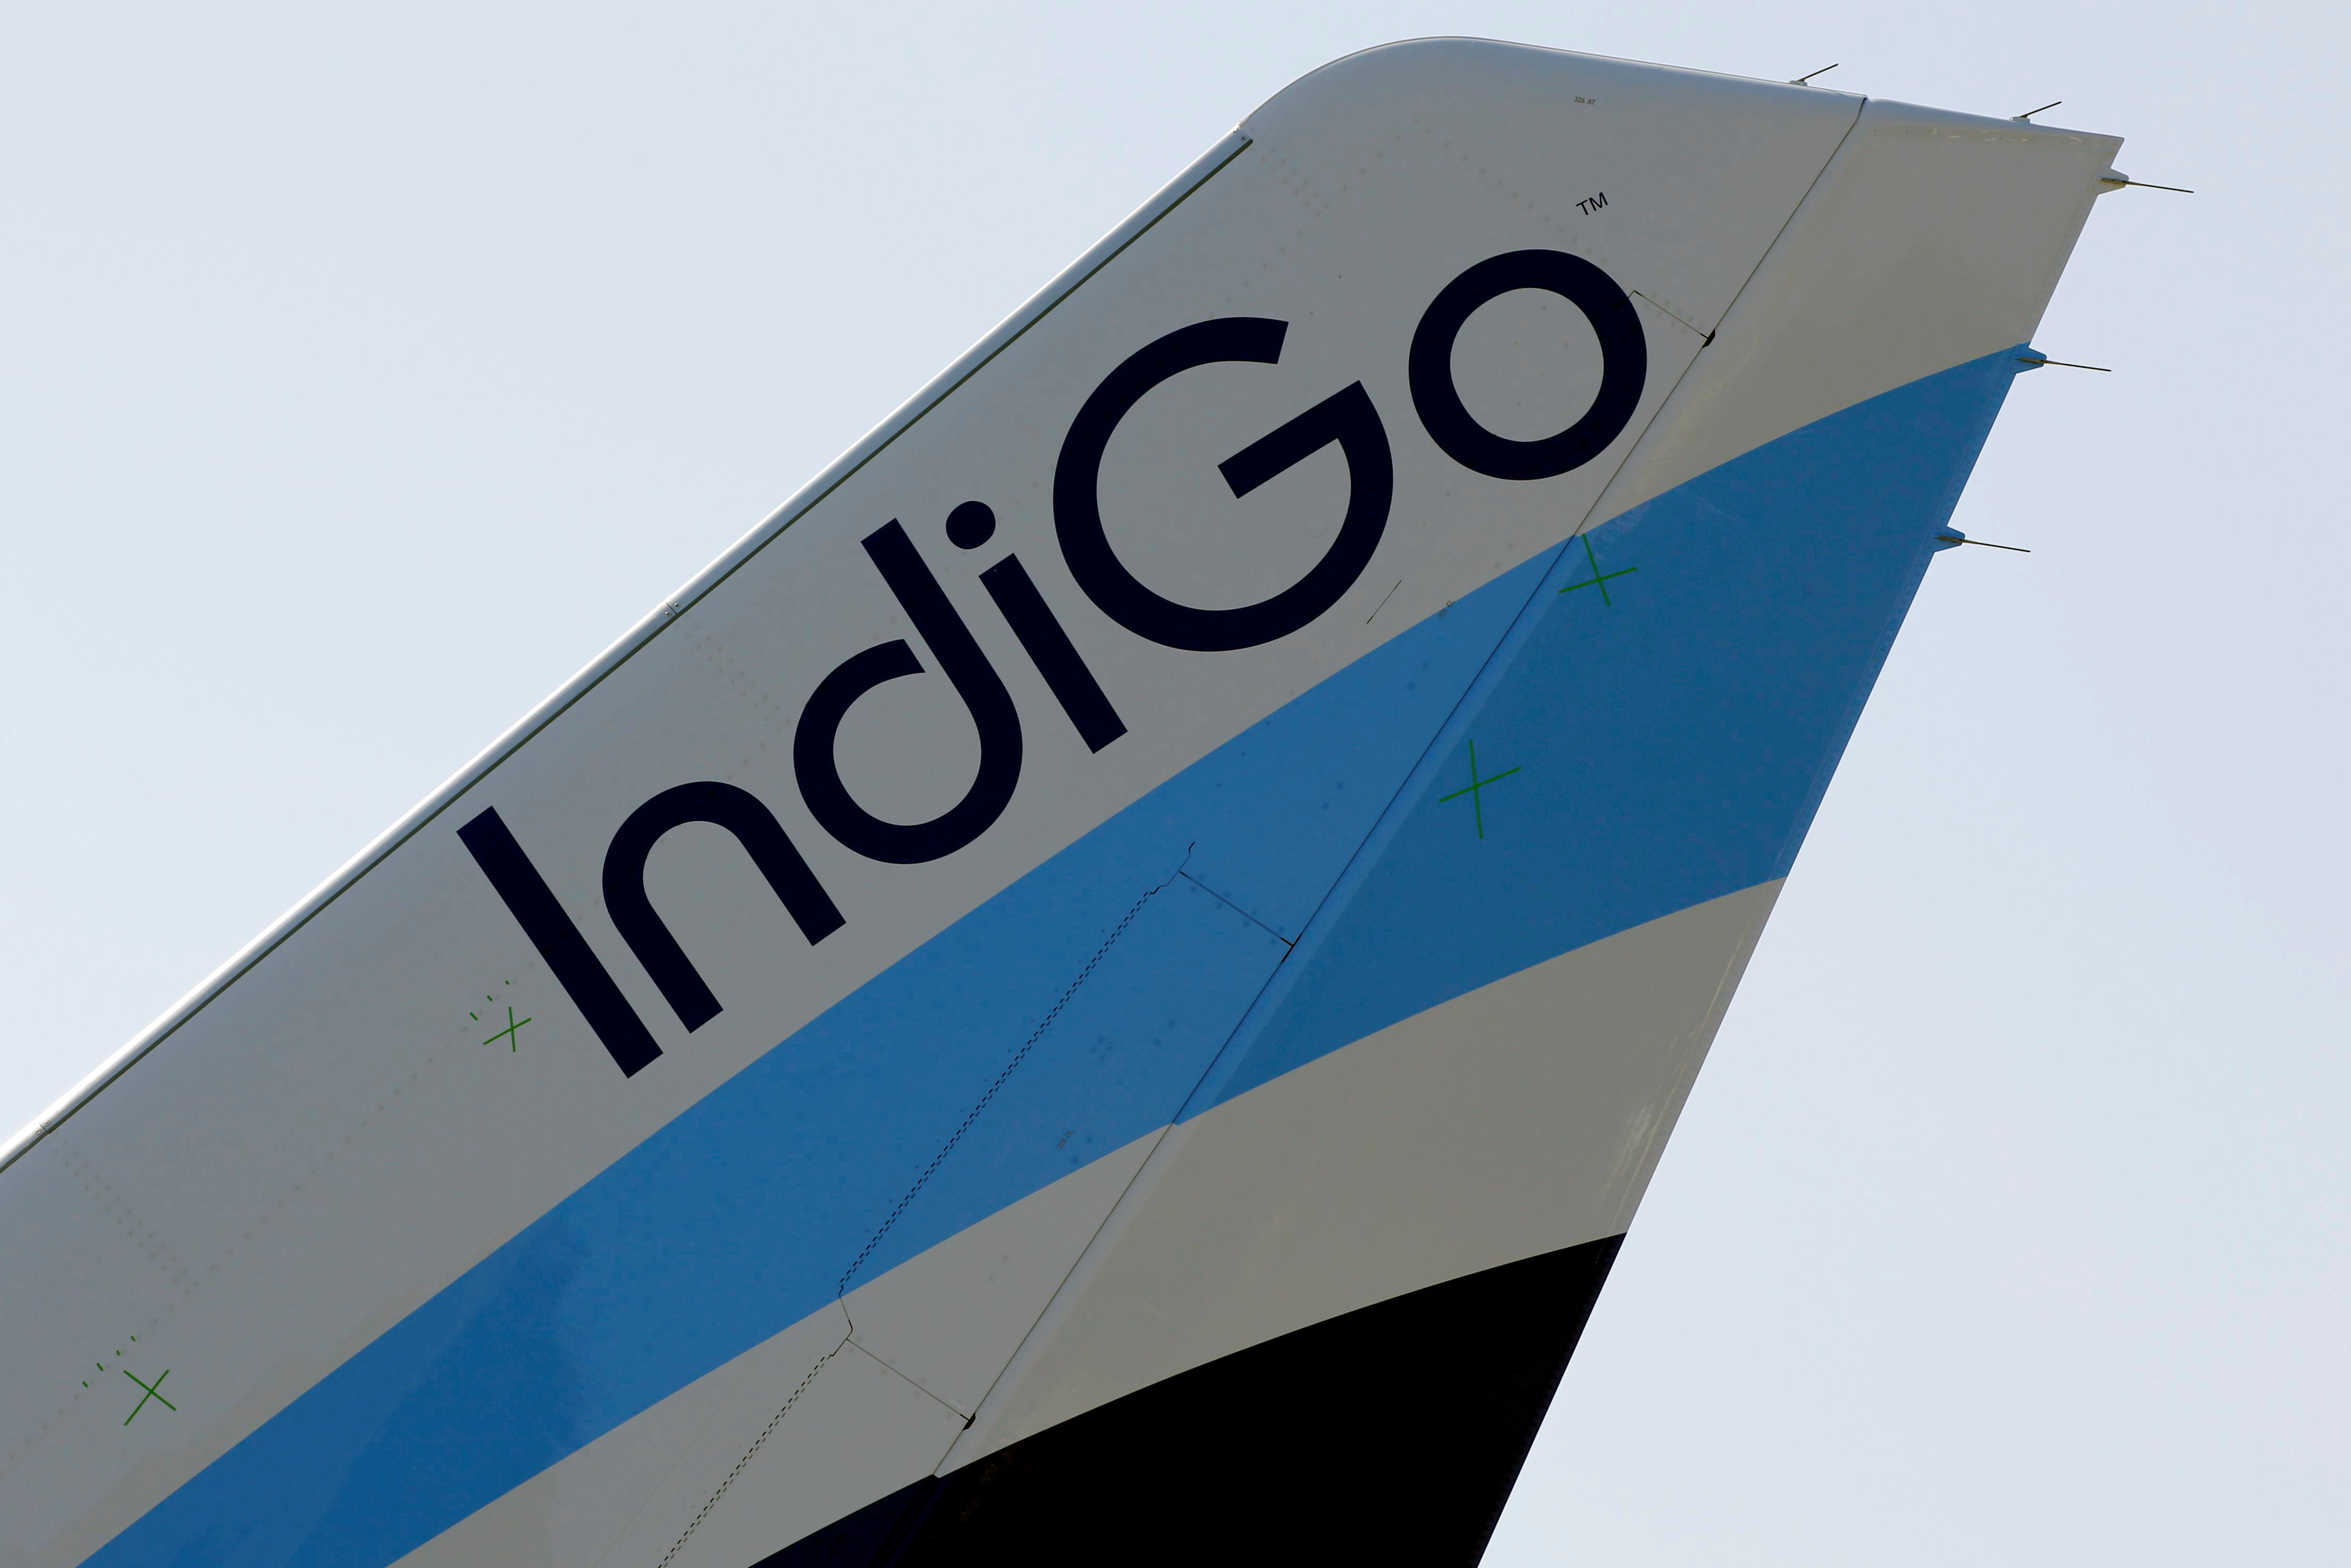 IndiGo flying high as it tightens grip in India and targets growth abroad